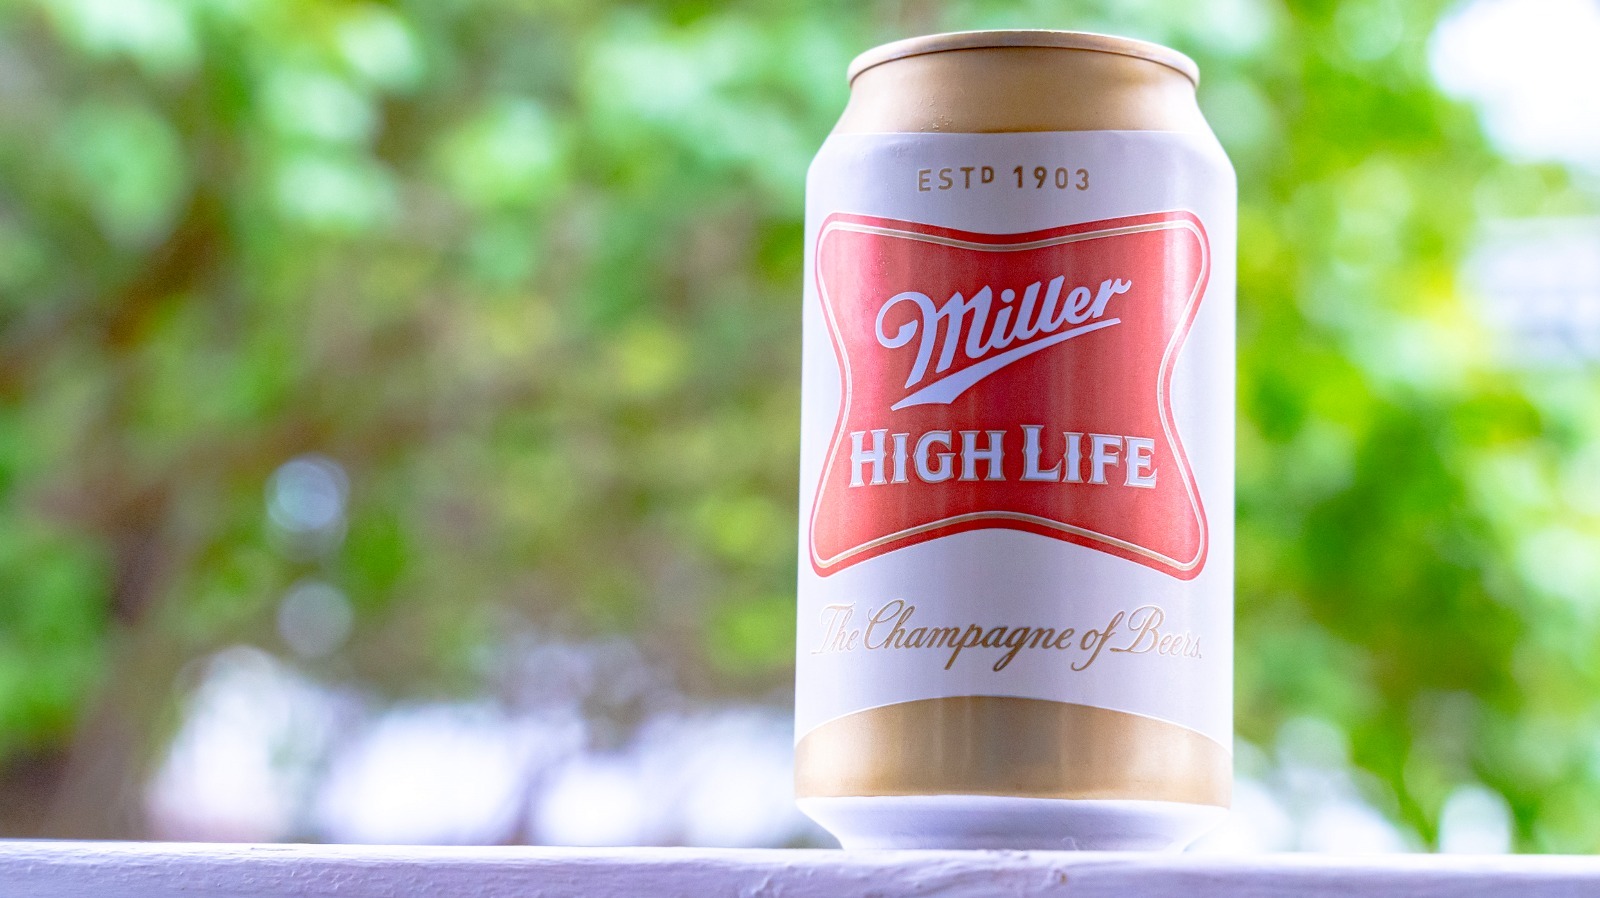 So soft and so French: Miller High Life Champagne of Beers slogan